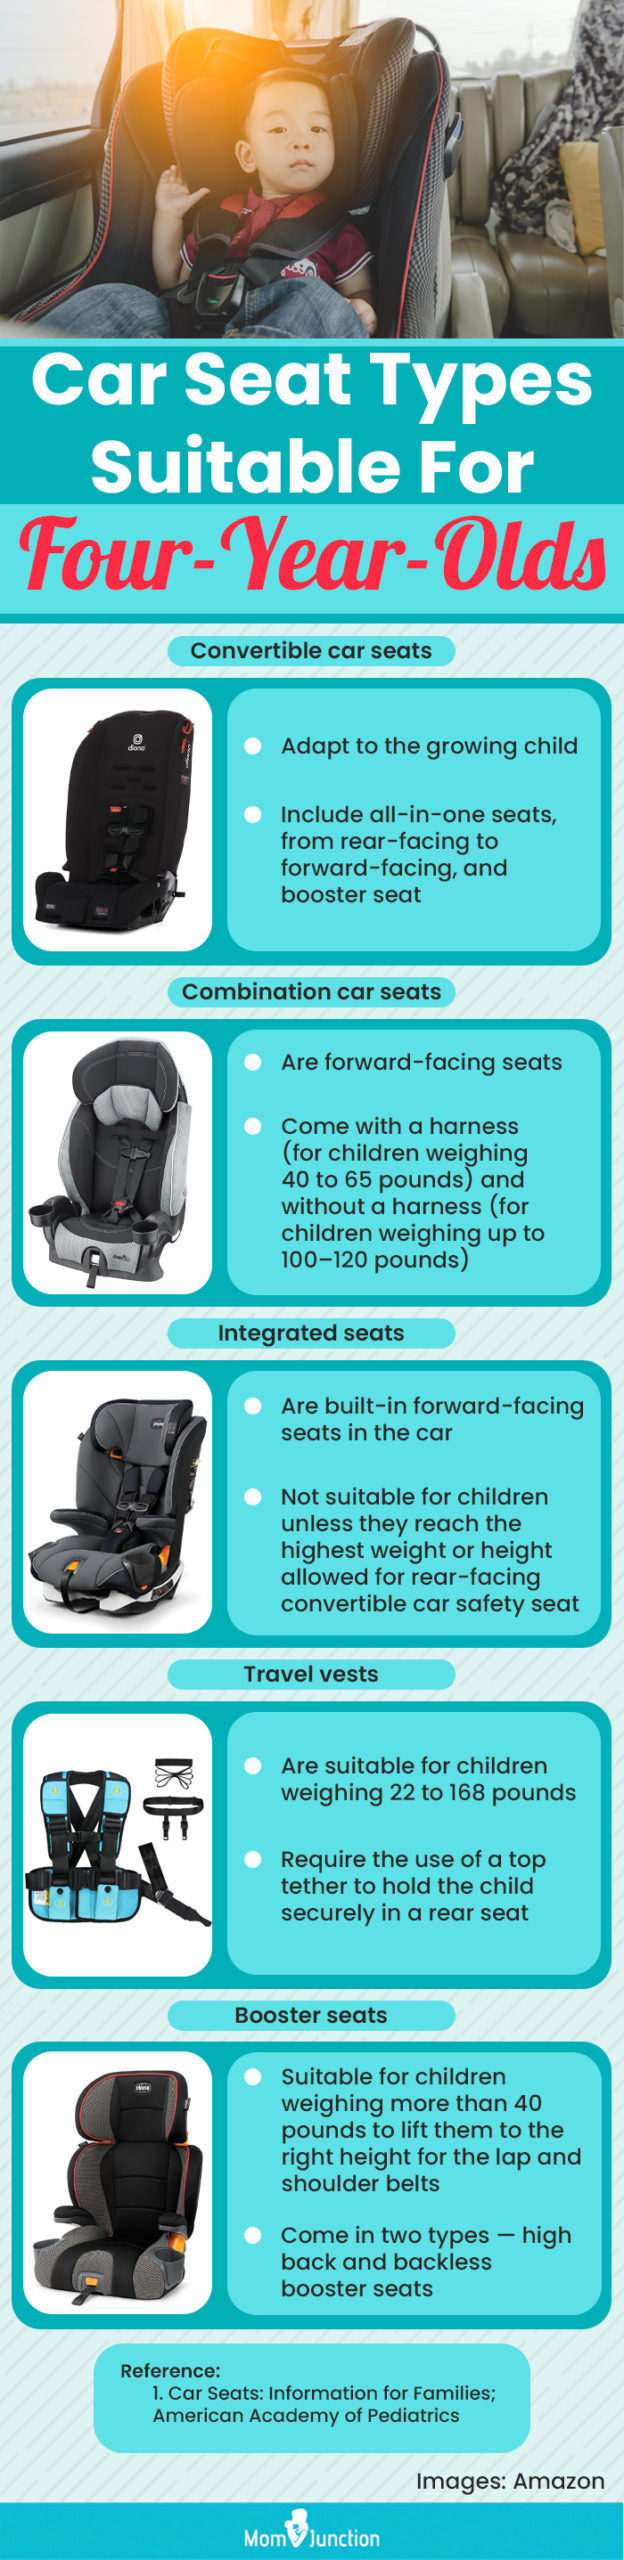 Car Seat Types Suitable For Four Year Olds (infographic)